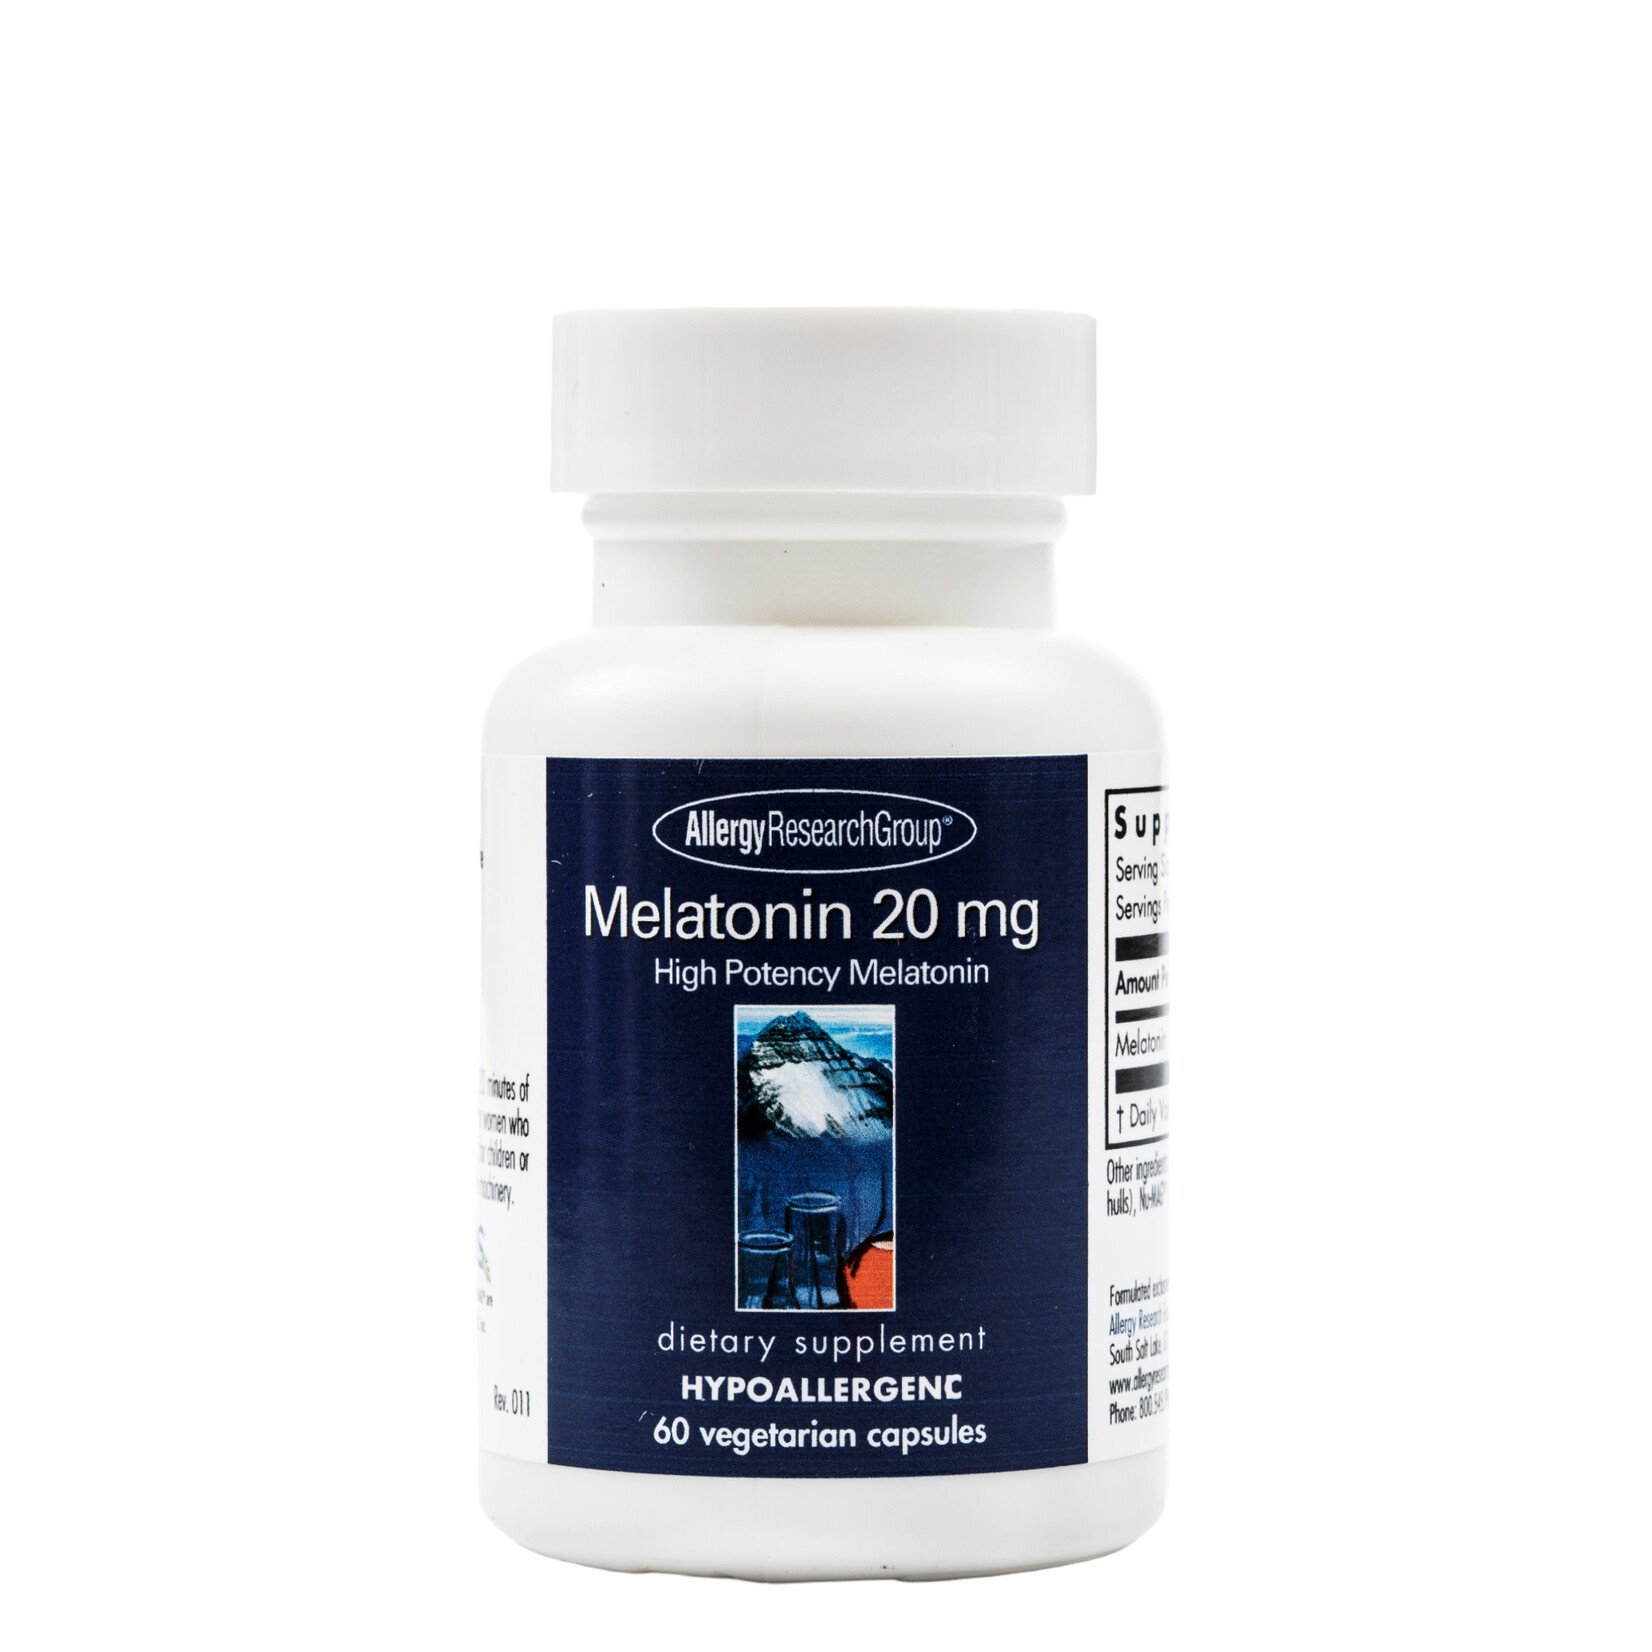 Allergy Research Group Melatonin 20mg 60c Allergy Research Group